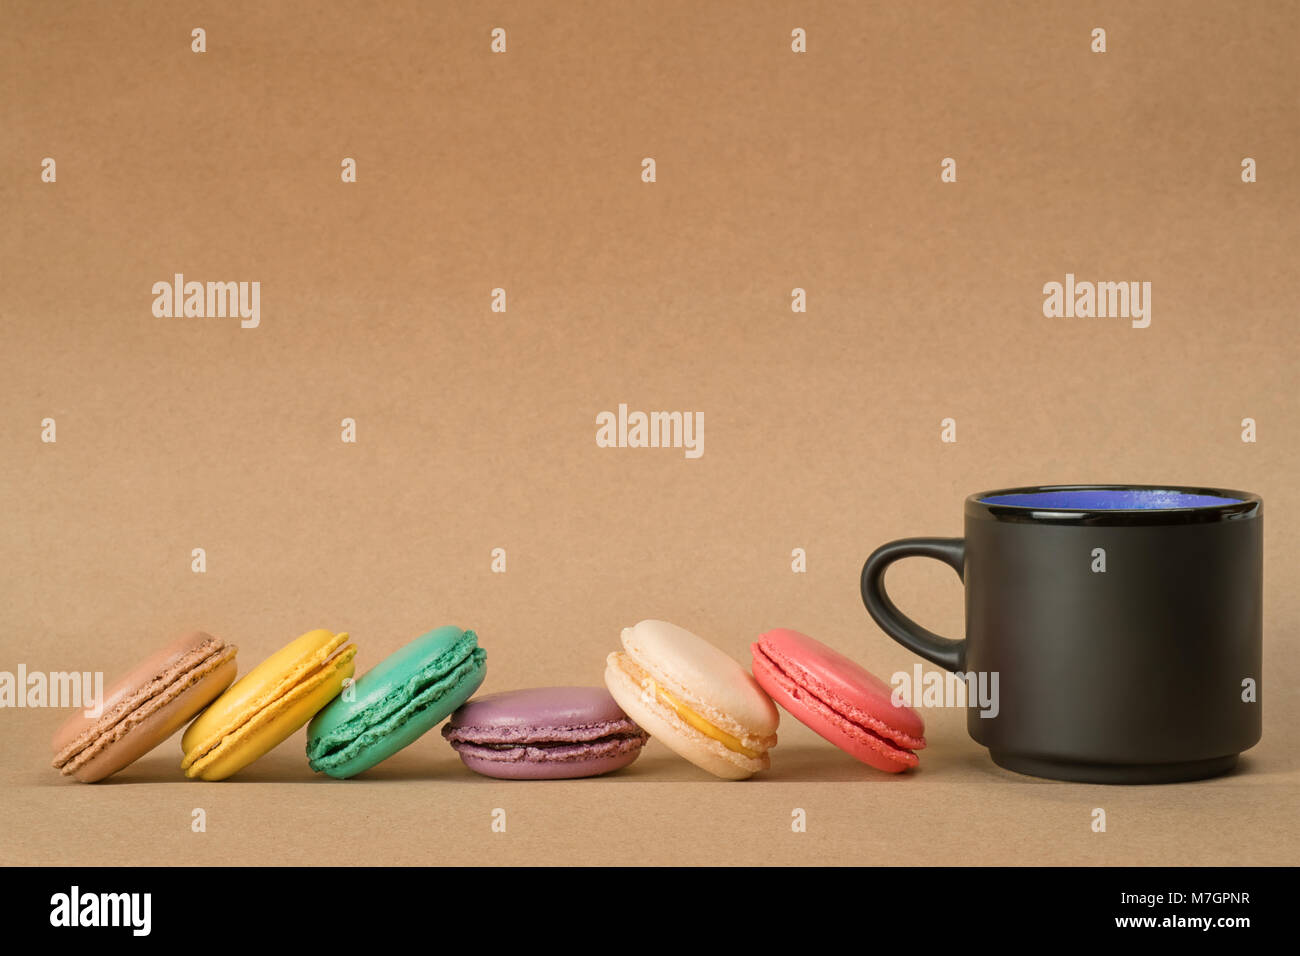 Colored macaroons row and black coffee cup on brown craft paper background. Side view with copy space Stock Photo